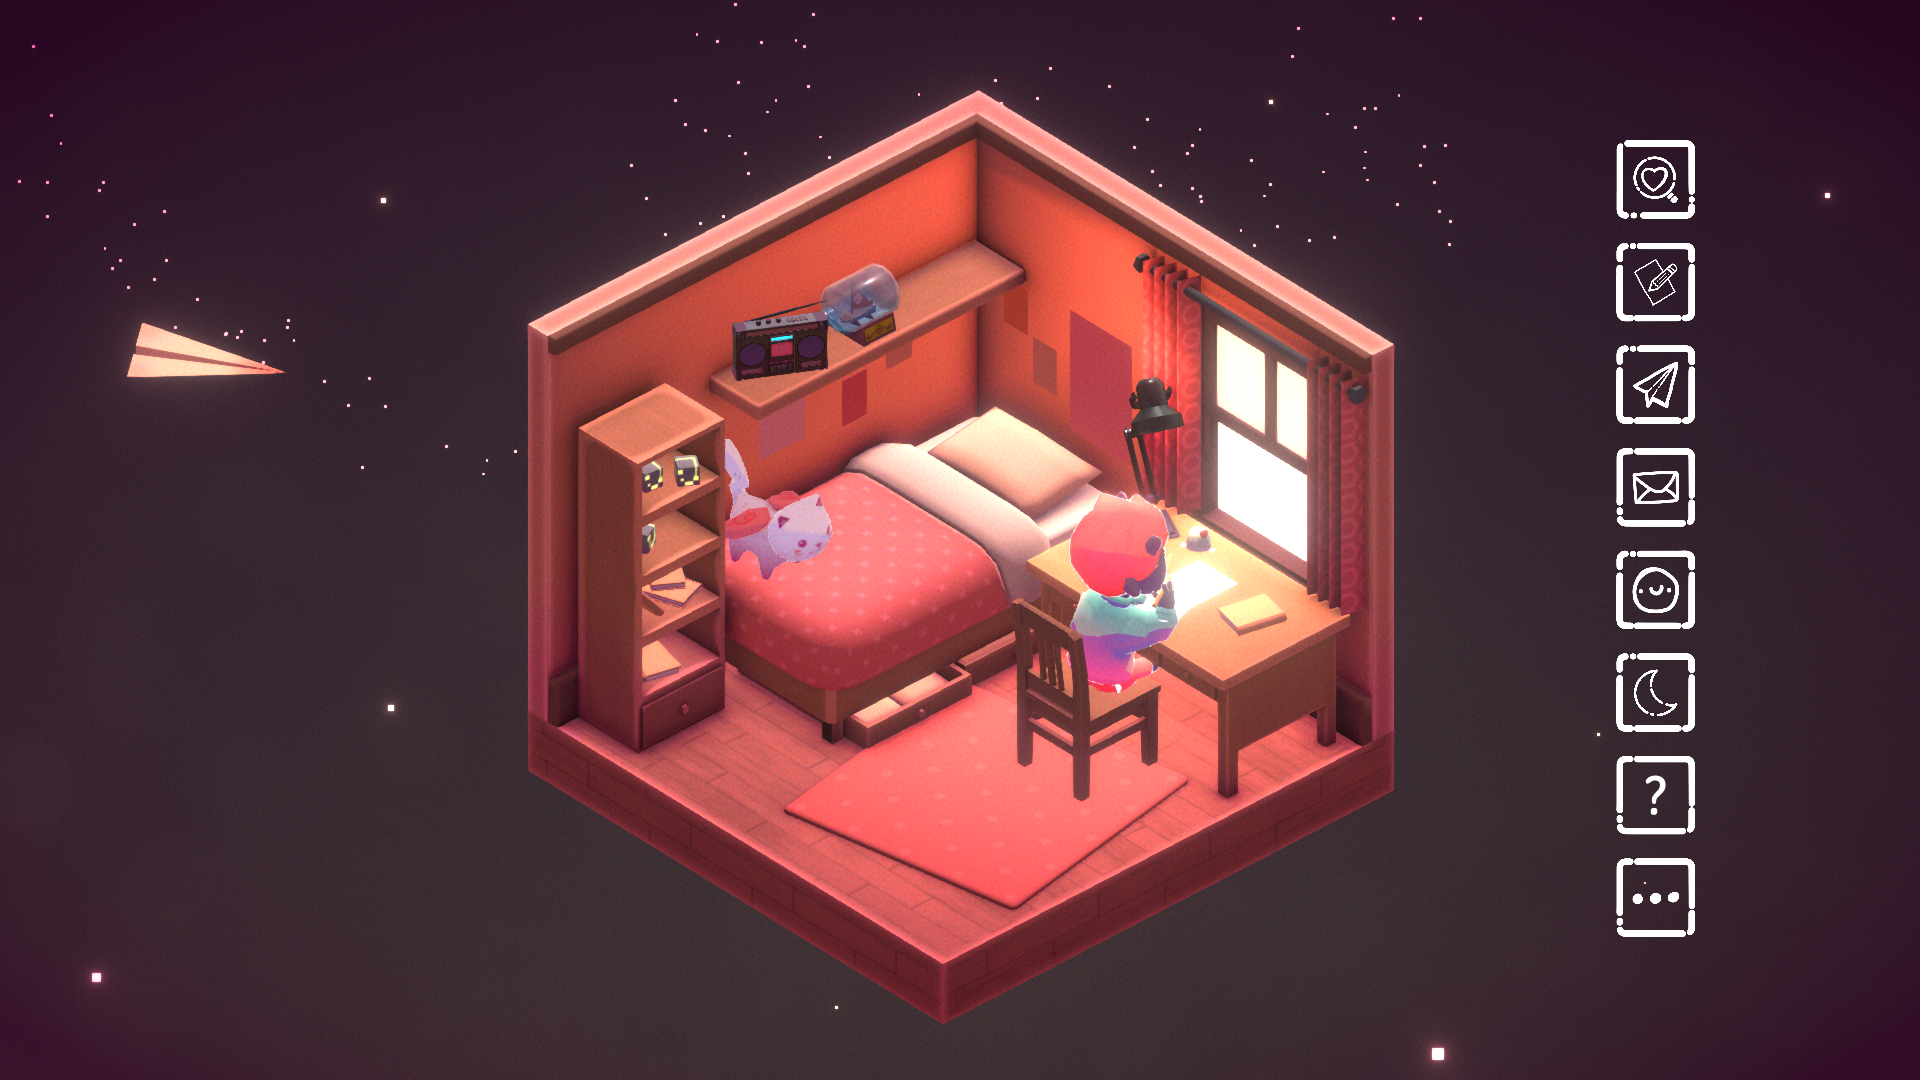 Screenshot from the game of a pink bedroom with various little knick knacks and a paper airplane flying onscreen.